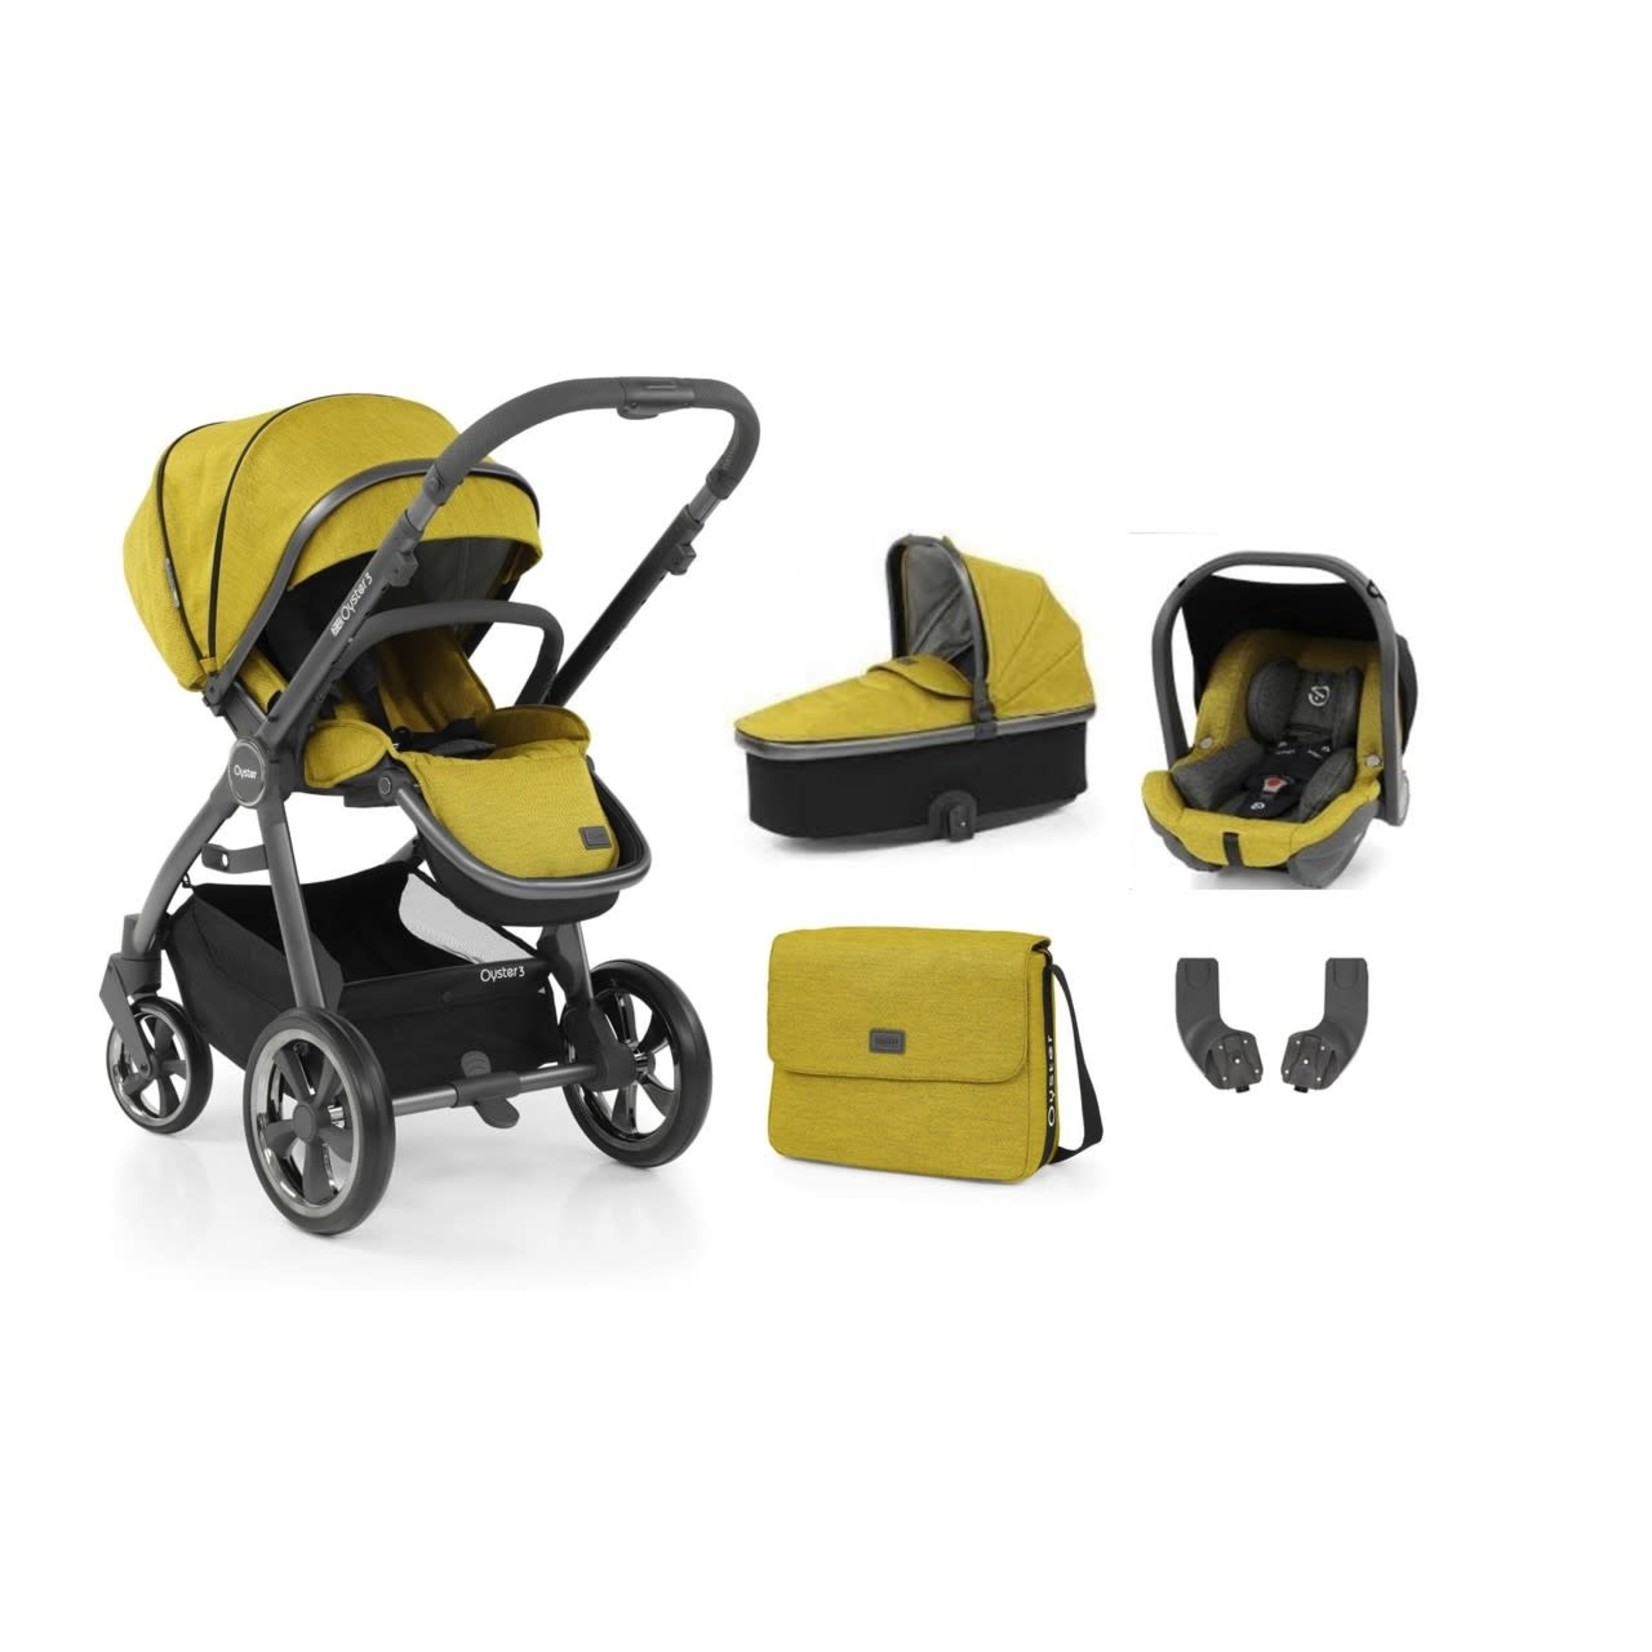 OYSTER BABYSTYLE OYSTER 3 COMPLETE 3 IN 1 TRAVEL SYSTEM  MUSTARD